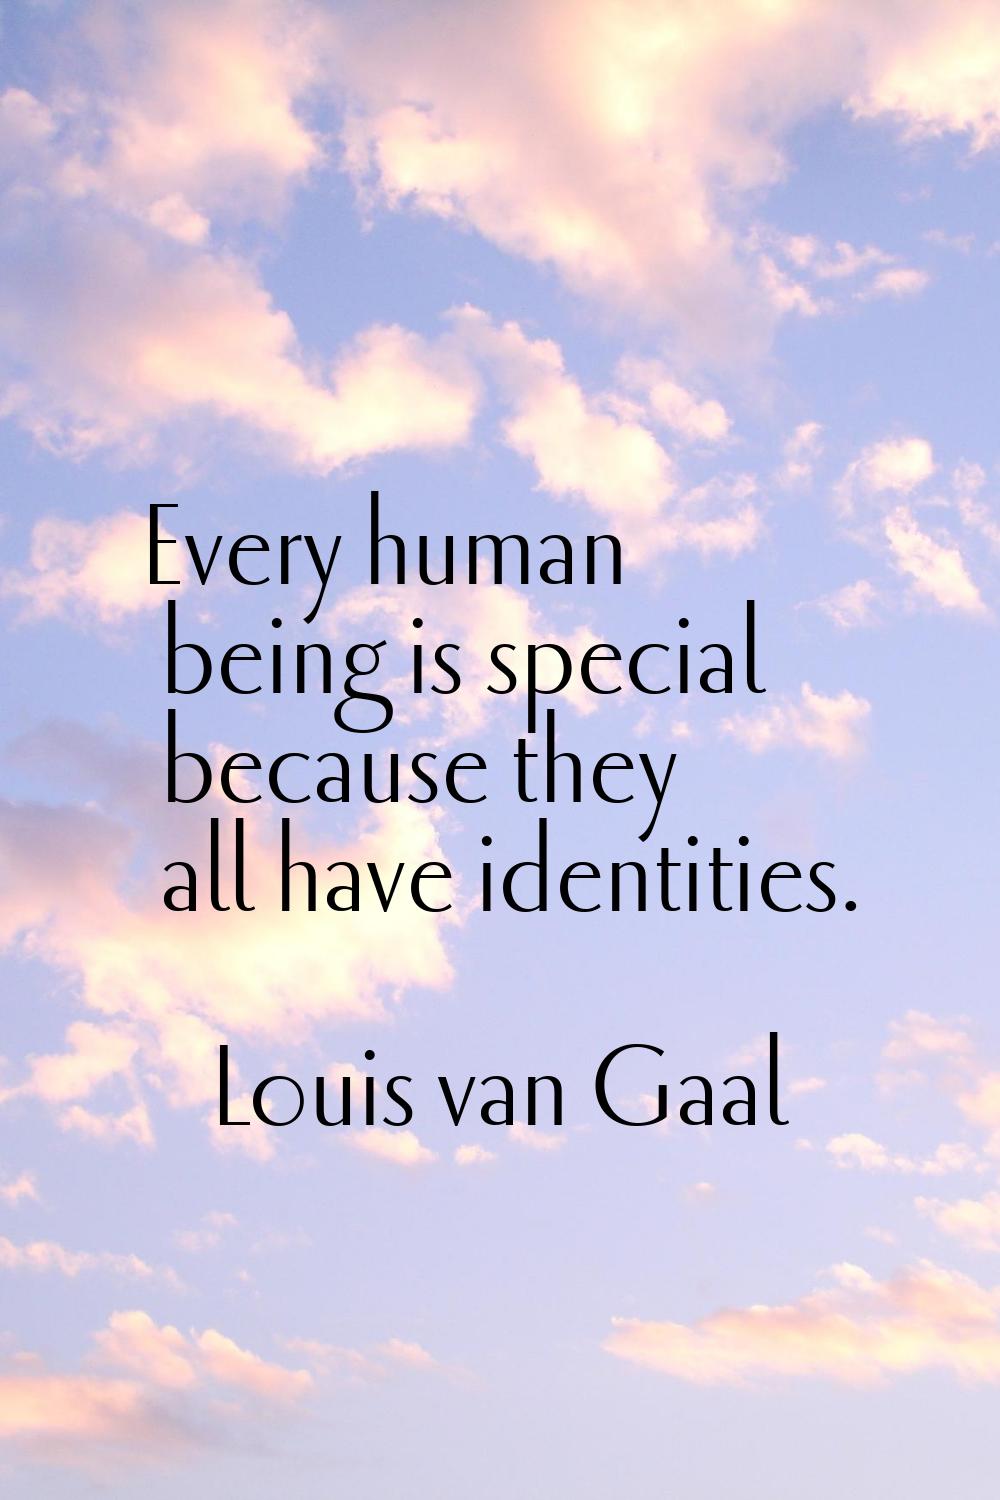 Every human being is special because they all have identities.